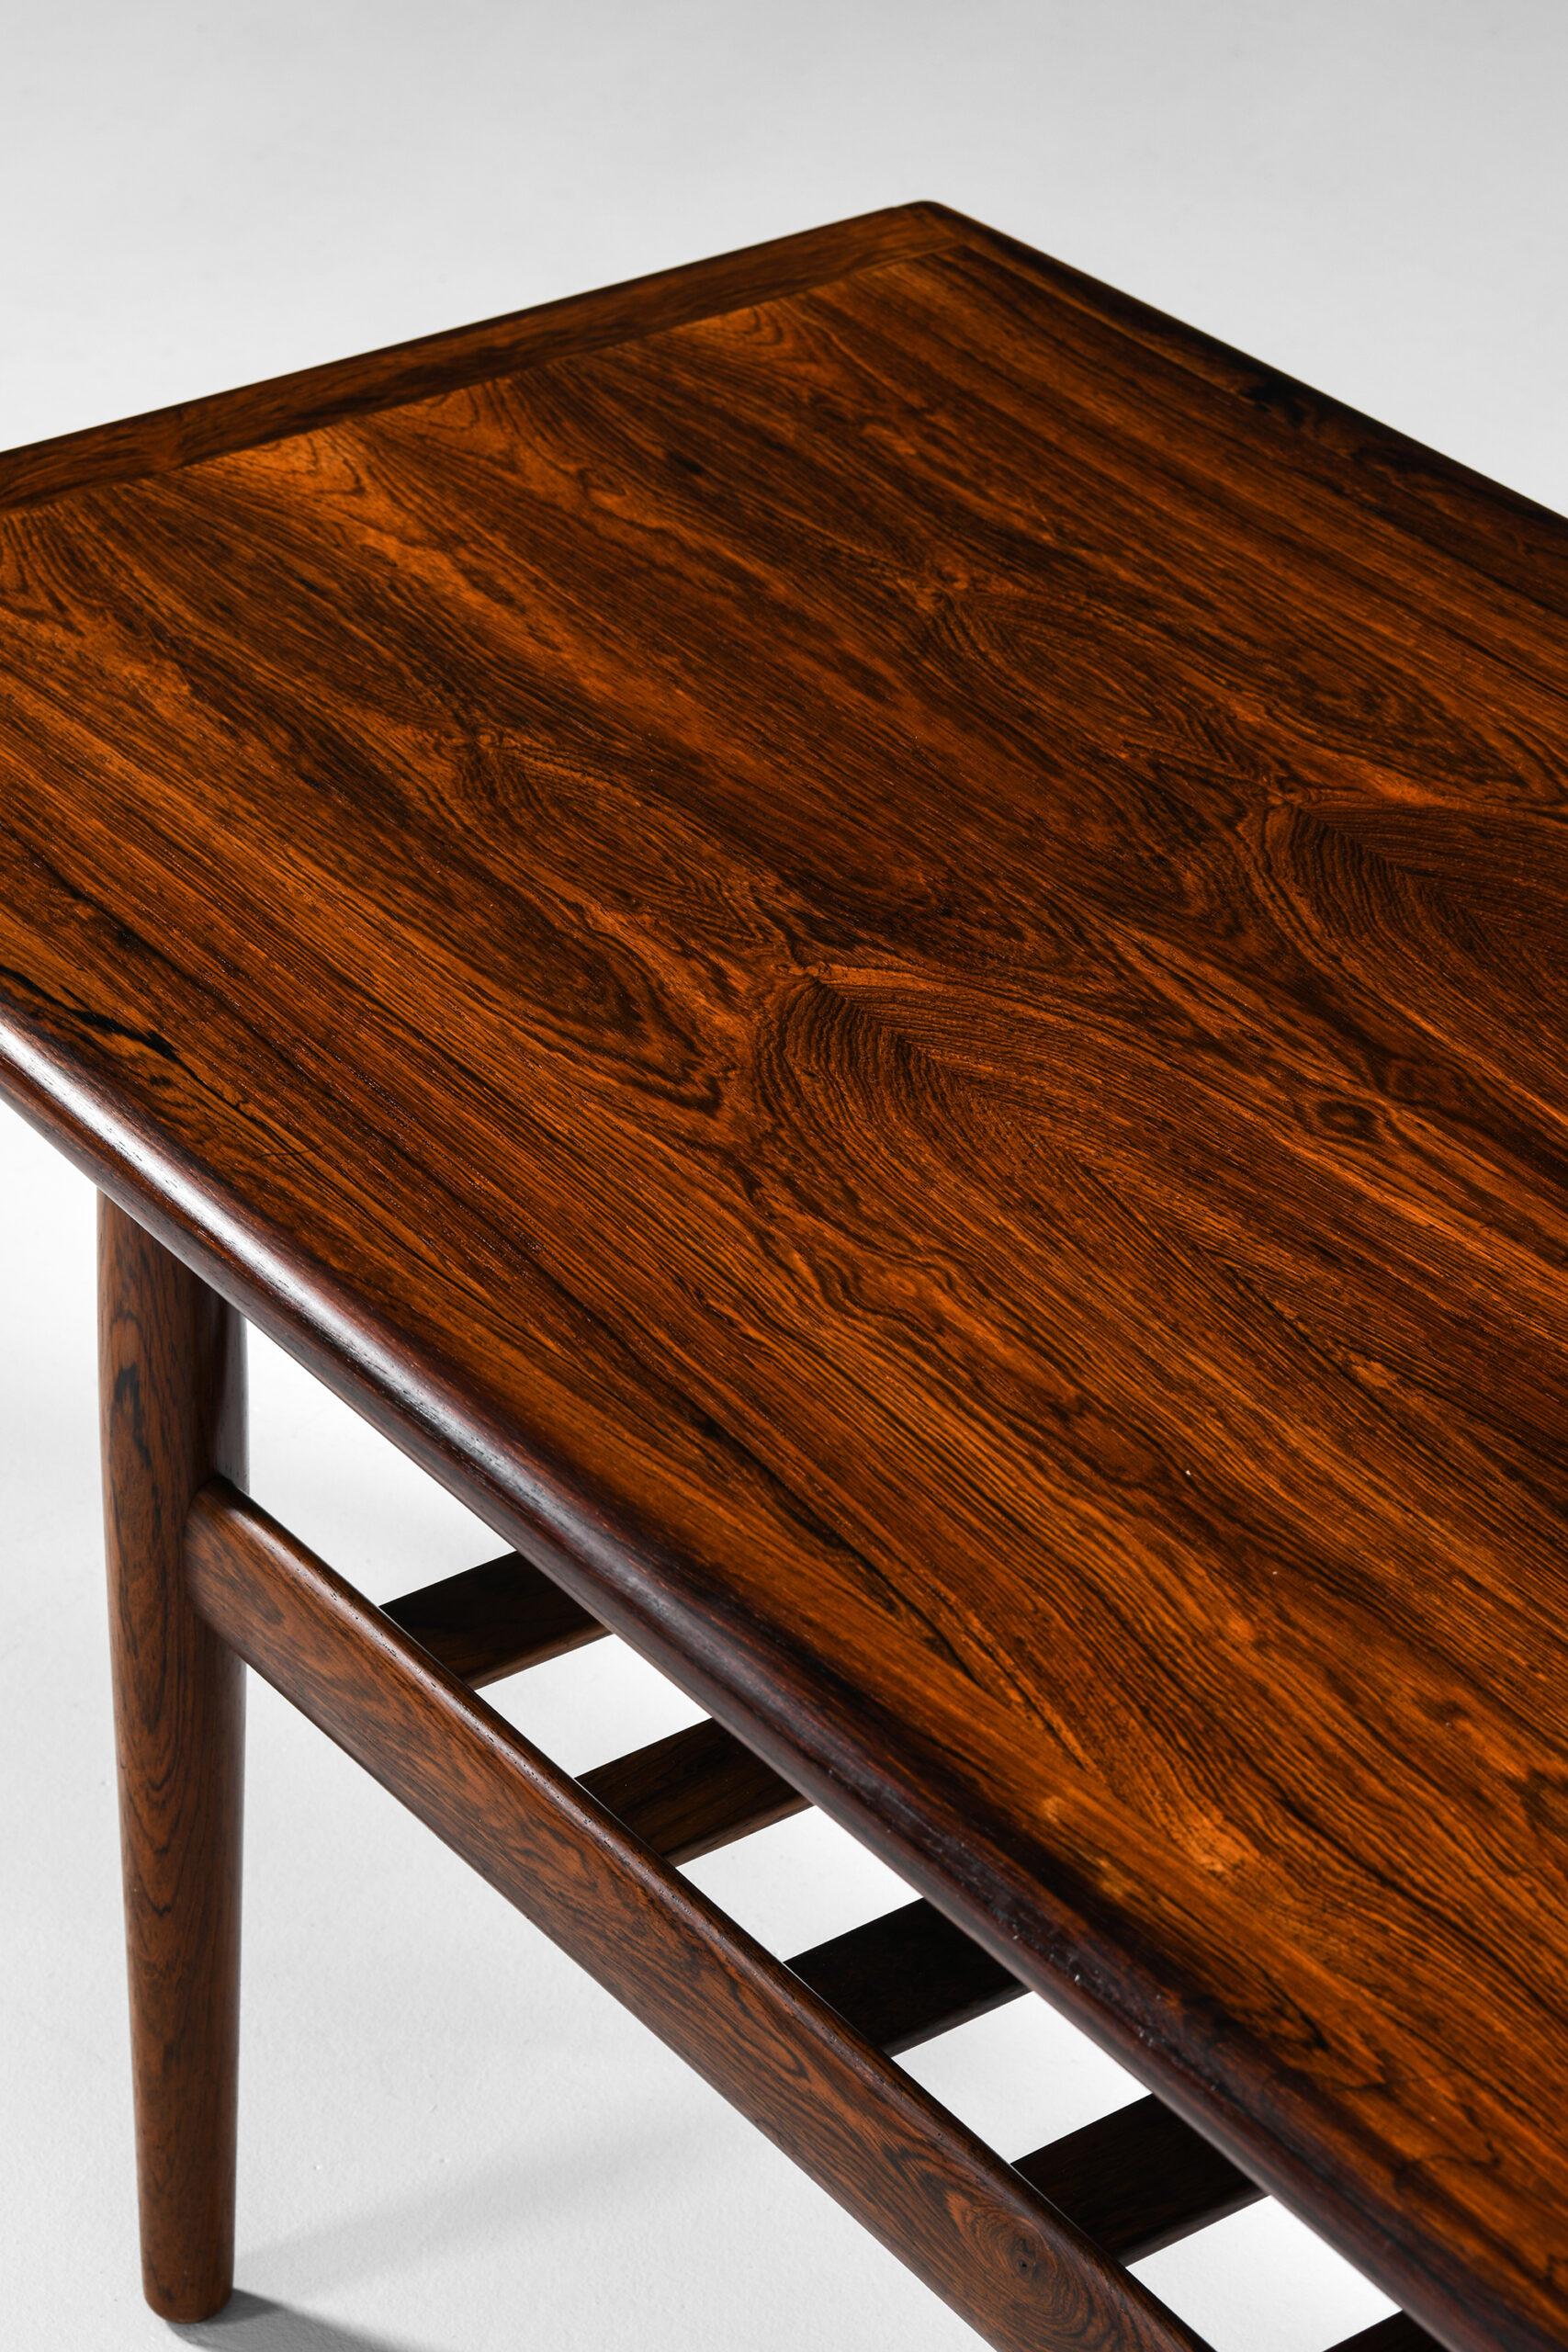 Rosewood Grete Jalk Coffee Table Produced by Glostrup Møbelfabrik For Sale